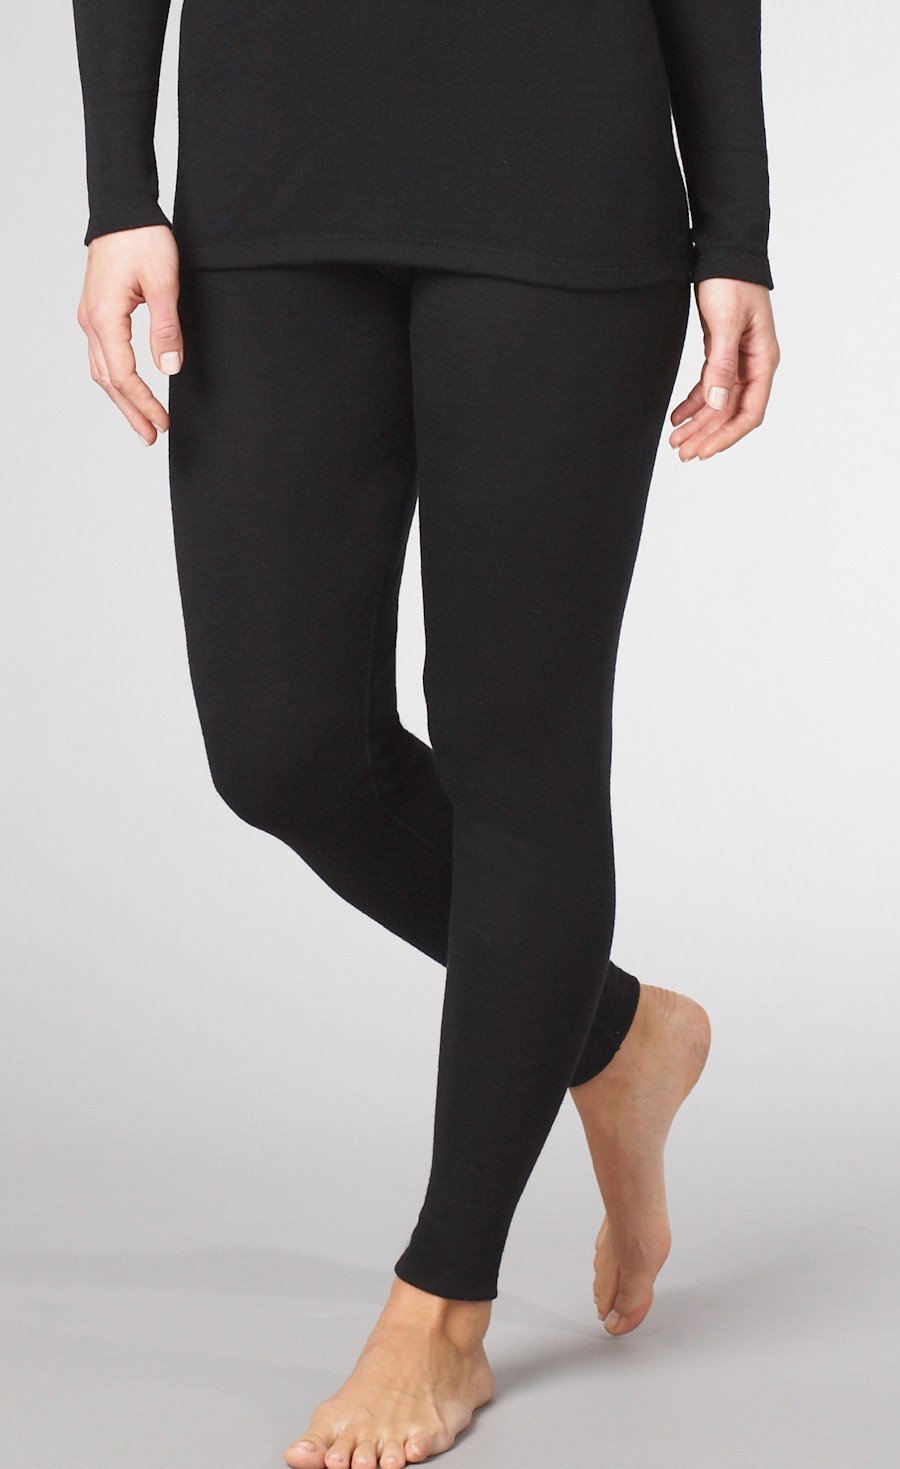 Chilled Out Leggings by Intimately at Free People in Grey, Size: Large, £34.00